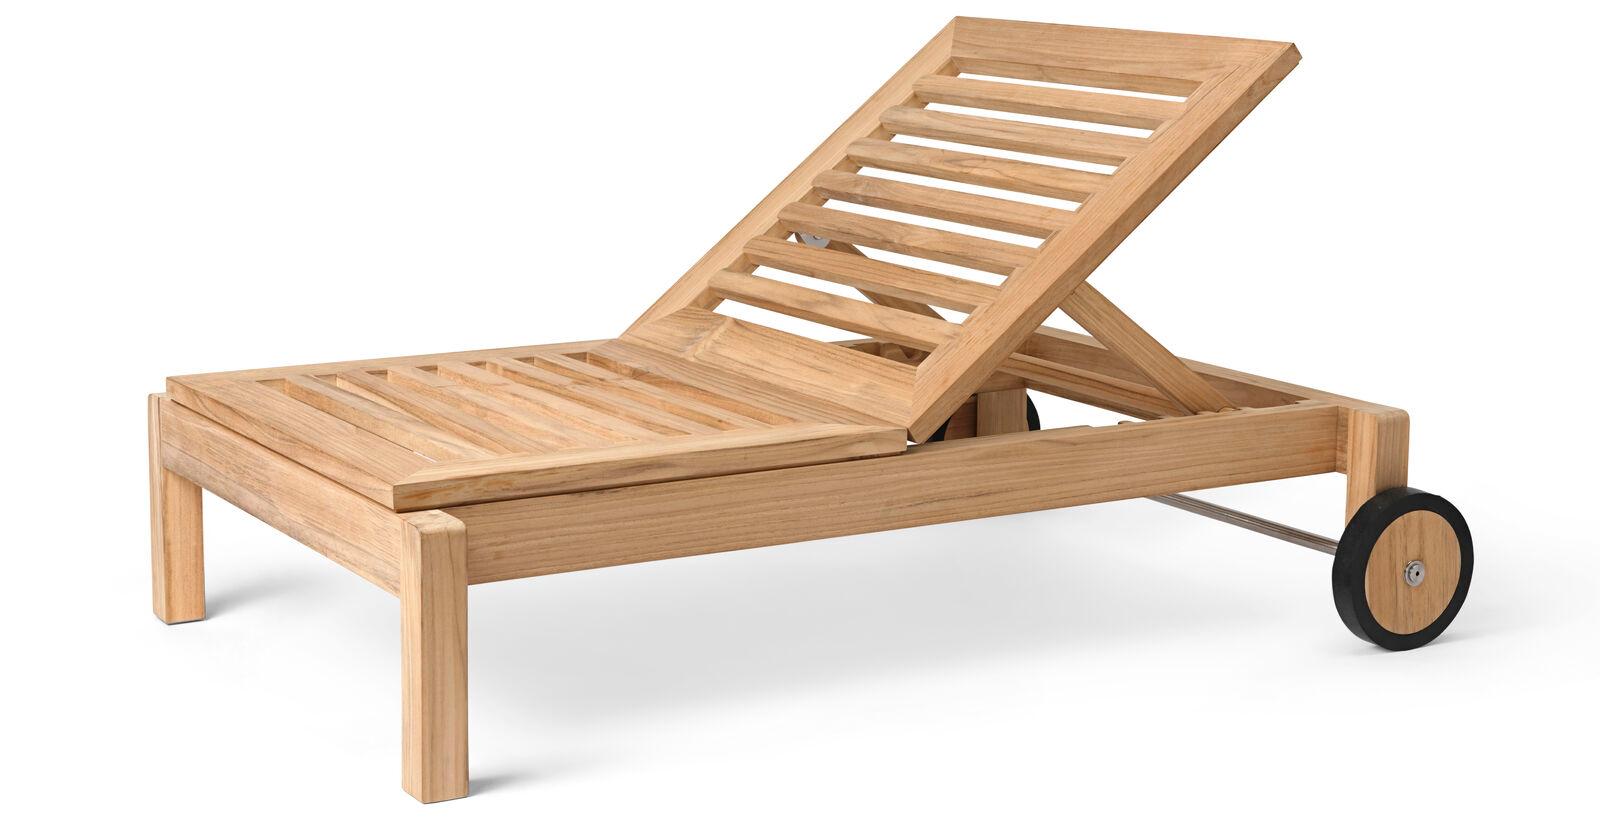 Alfred Homann designed the AH604 Outdoor Lounger in 2022 as part of the AH Outdoor series. Like the rest of the outdoor furniture in the series, it is characterized by strict lines elegantly combined with soft, rounded details. The lounger can be